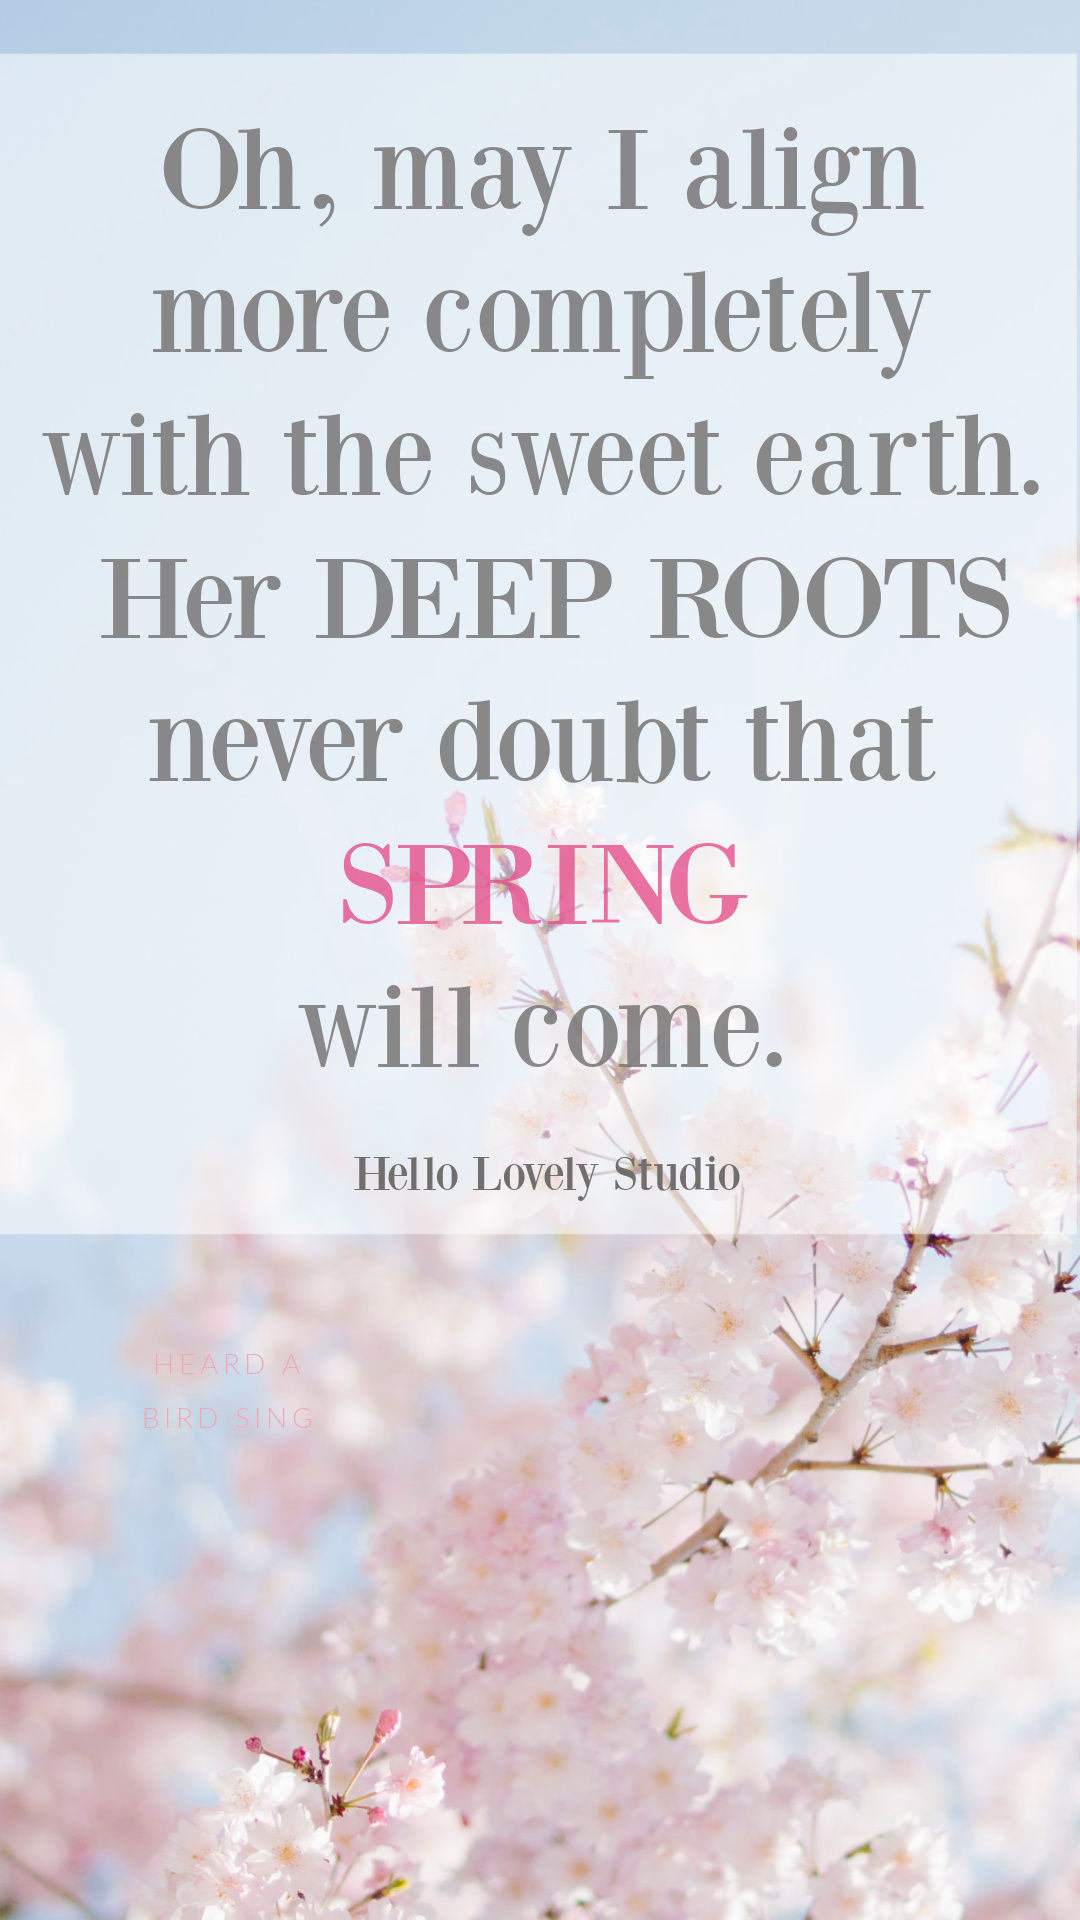 Spring quotes inspirational to welcome hope and encourage wholeness - Hello Lovely Studio. #springquotes #inspirationalspringquotes